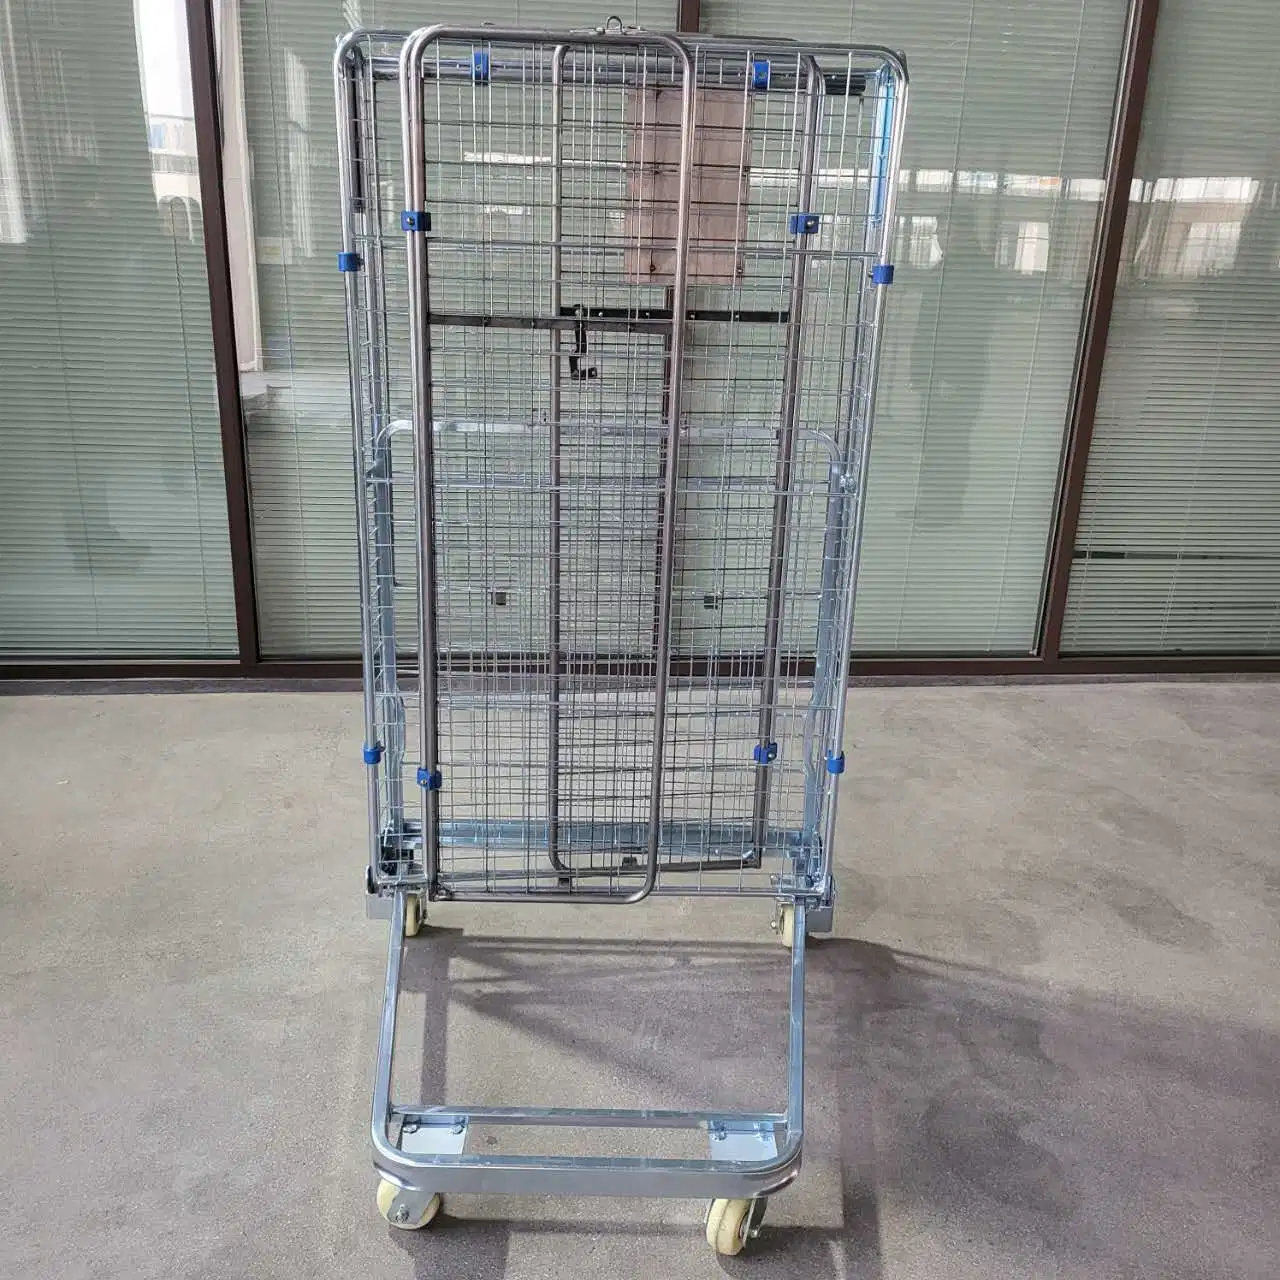 Load 500 Kg Warehouse Steel Metal Folding Cage Trolley Logistics Transport Cargo Roll Container Nestable Roll Cage Cart